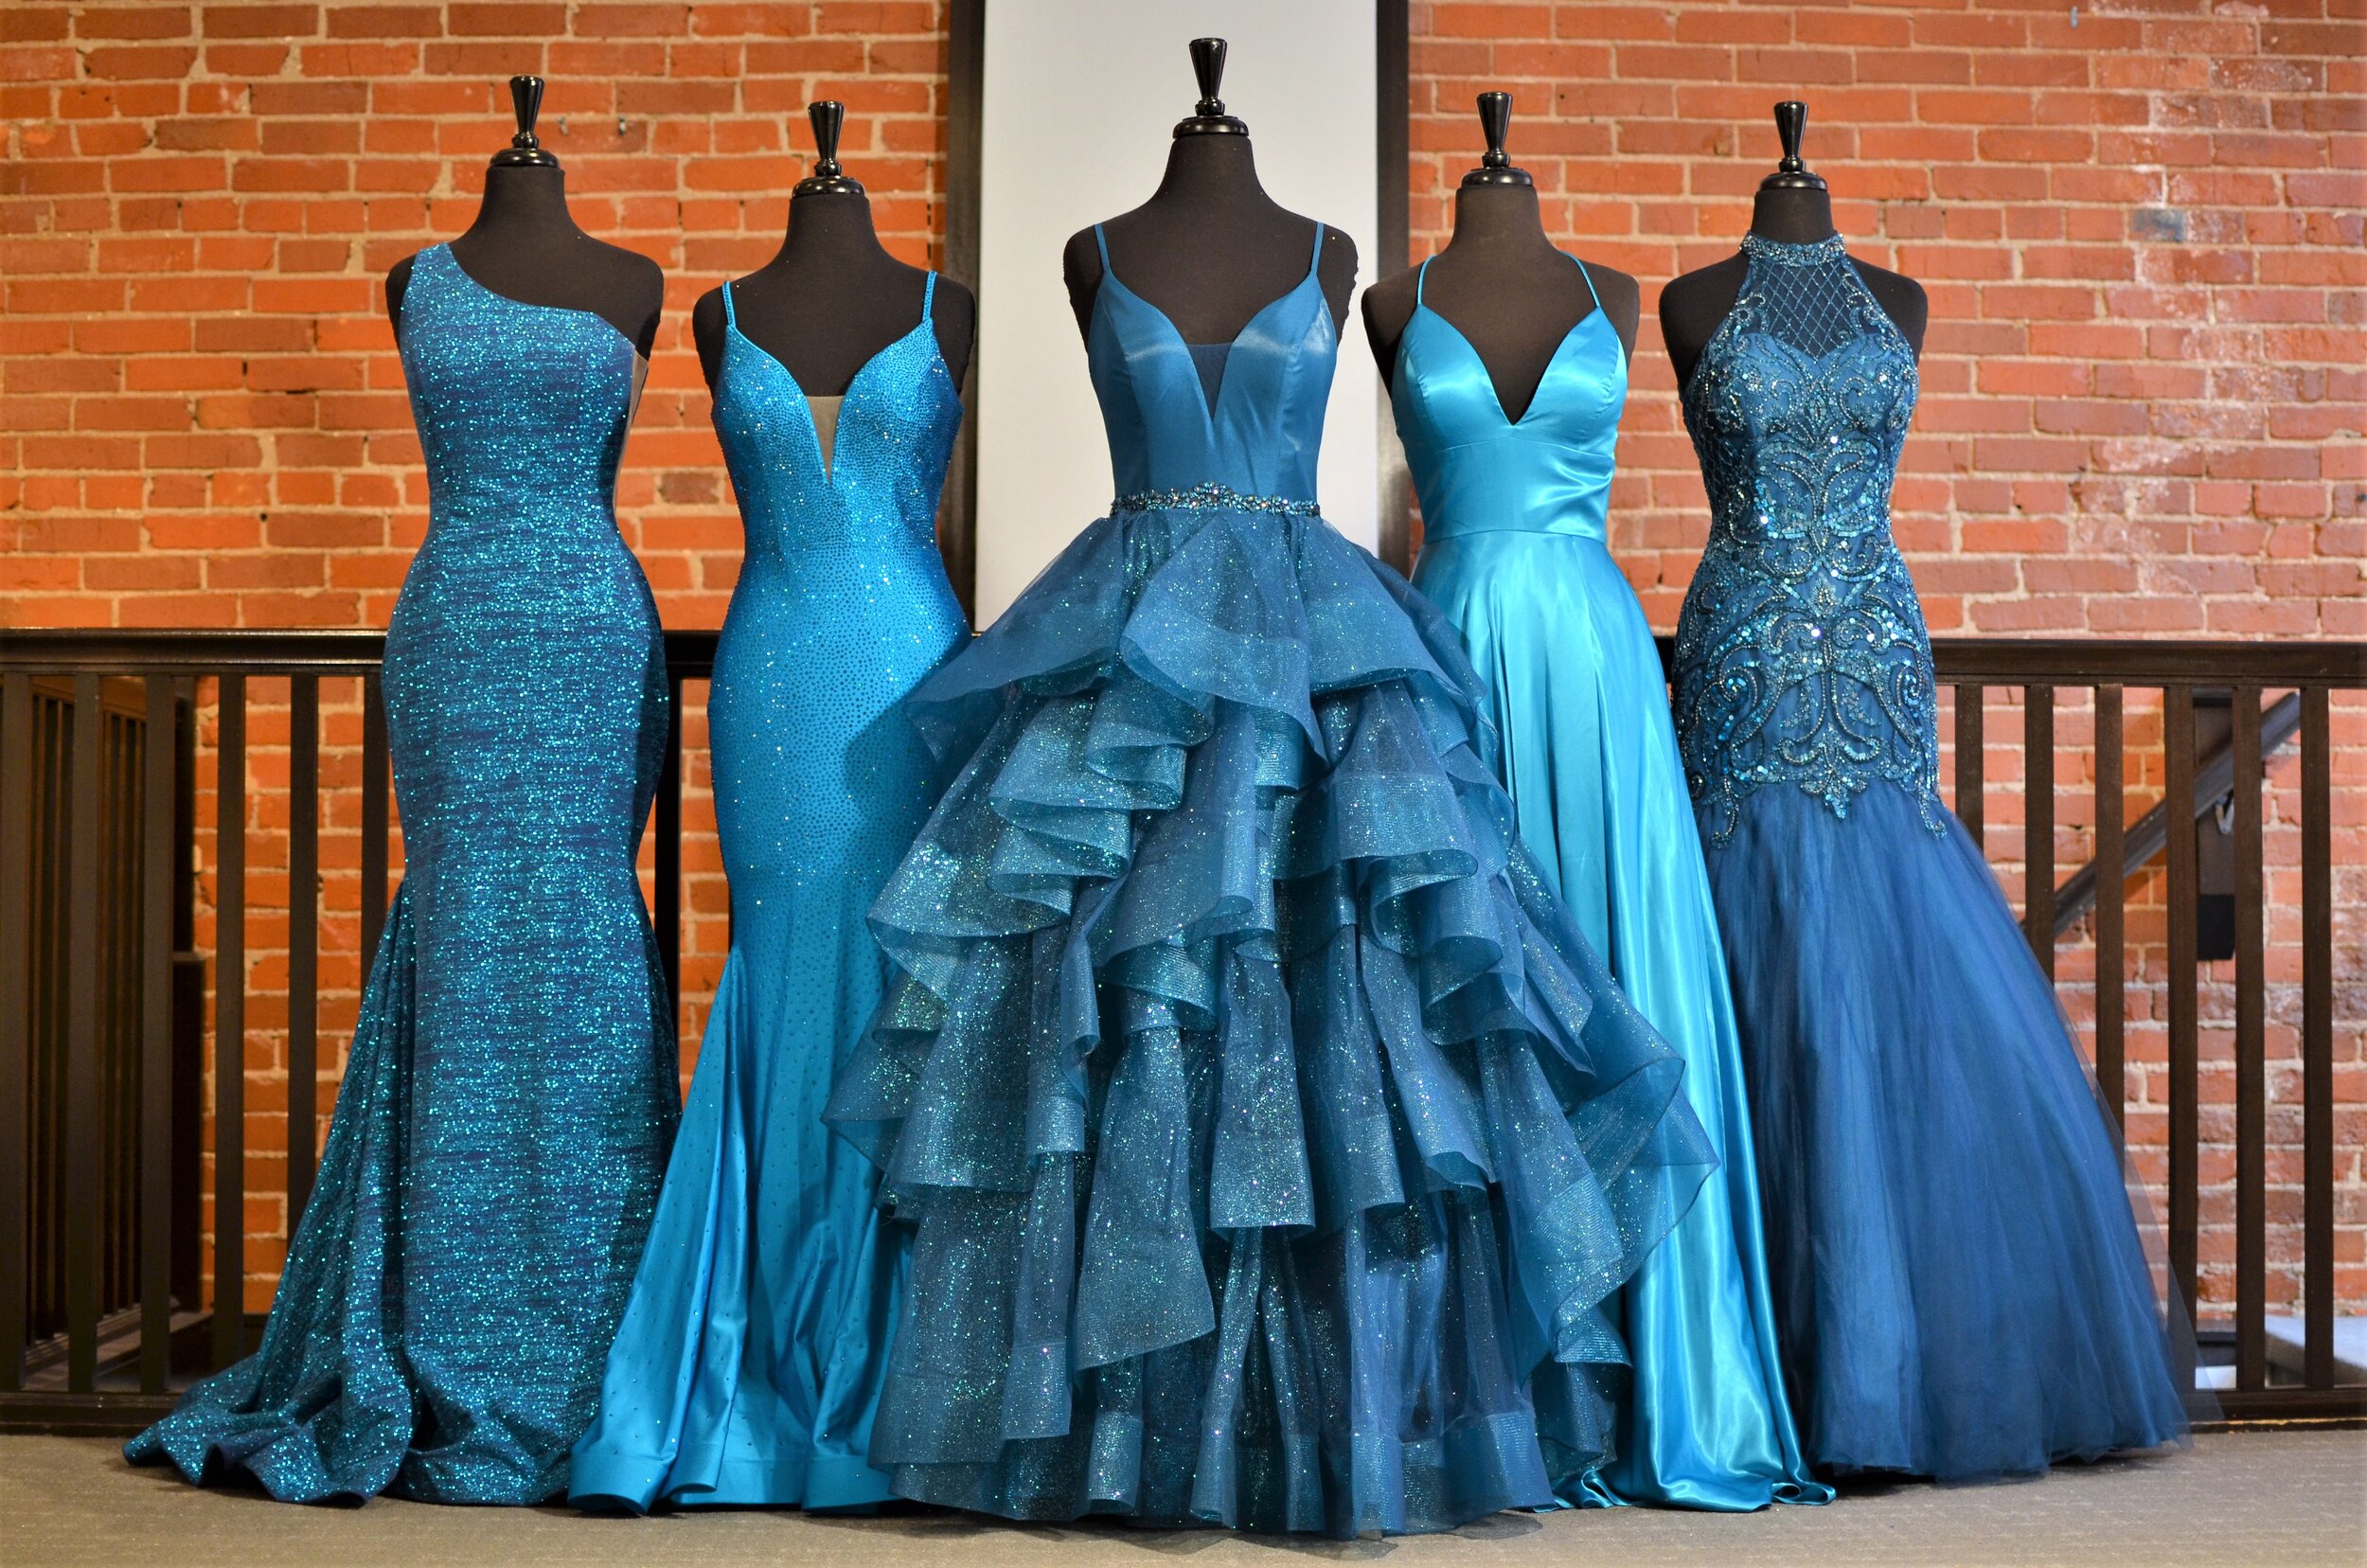 Buy > local prom dress shops near me > in stock